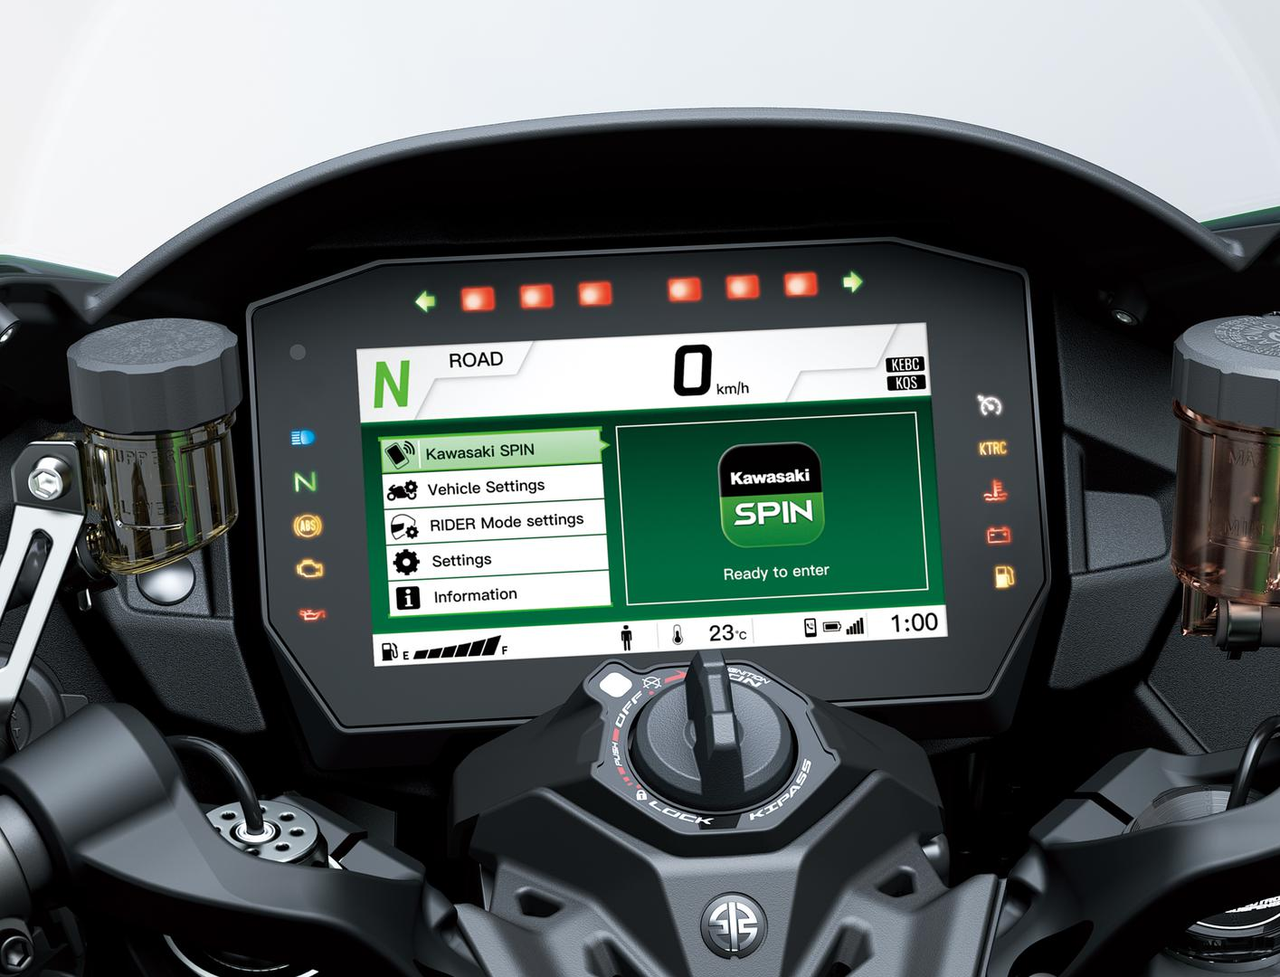 Advanced Rider Assistance Systems (ARAS)